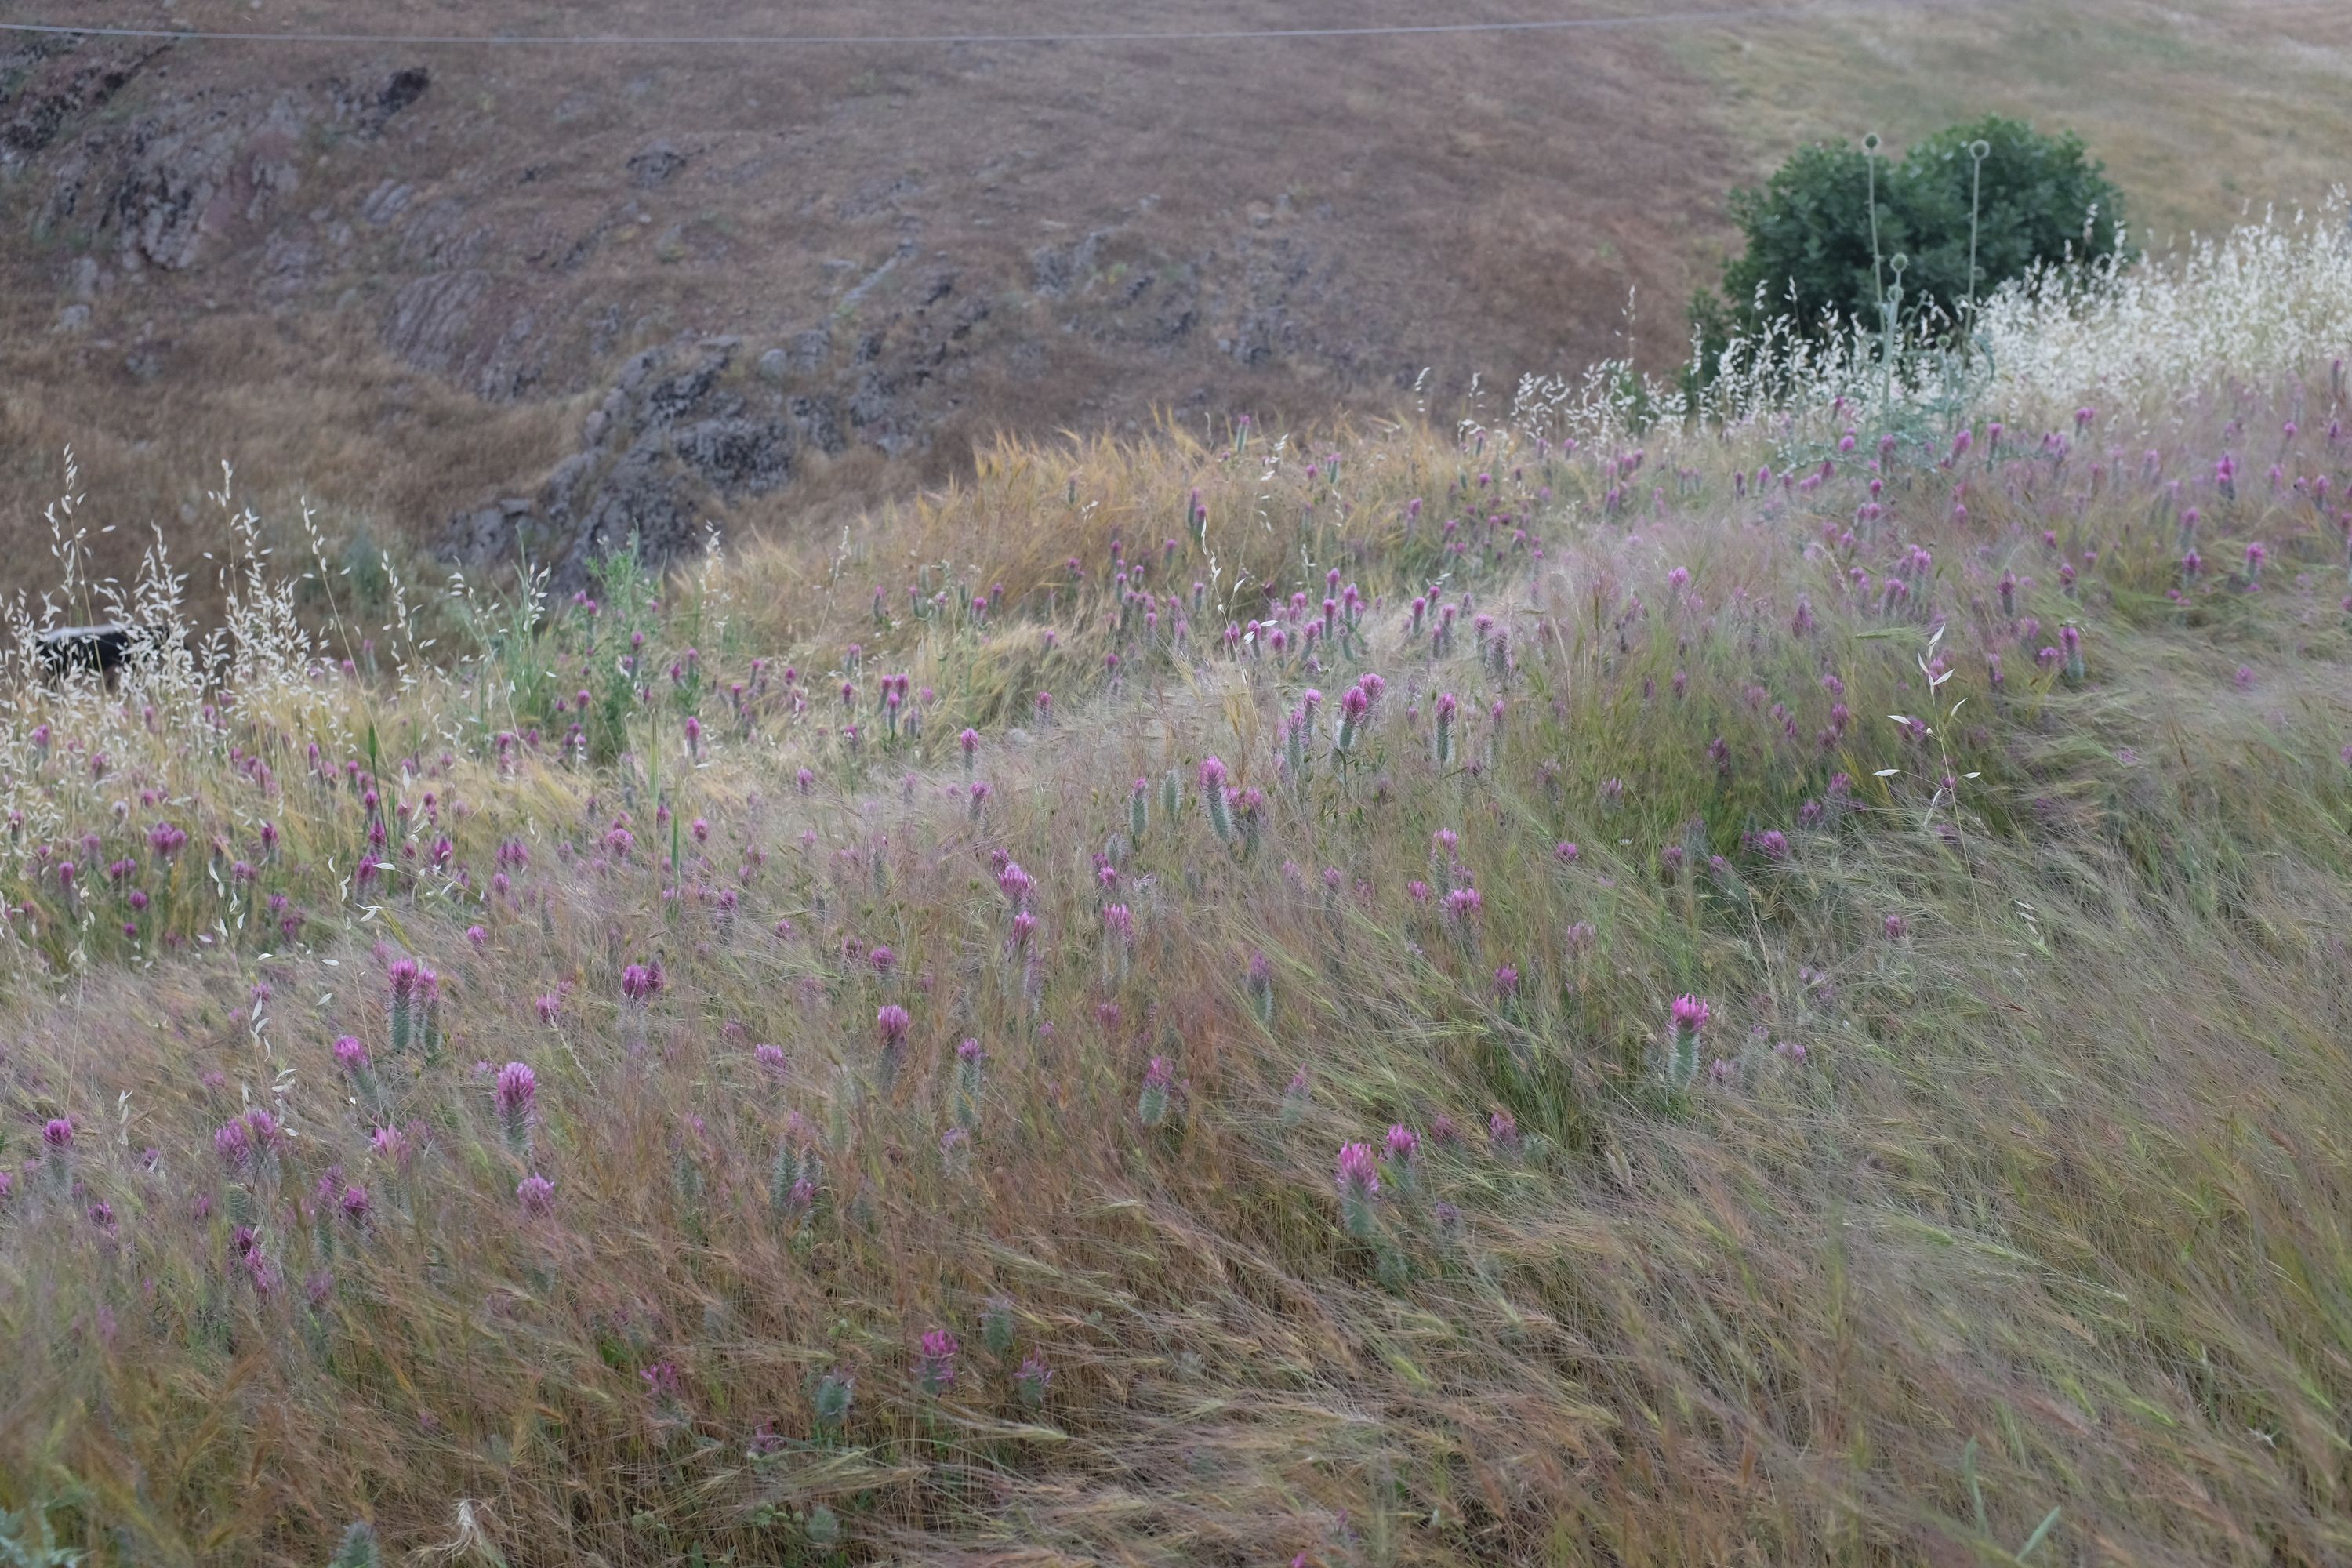 Pink flowers in a straw-yellow, hilly landscape.